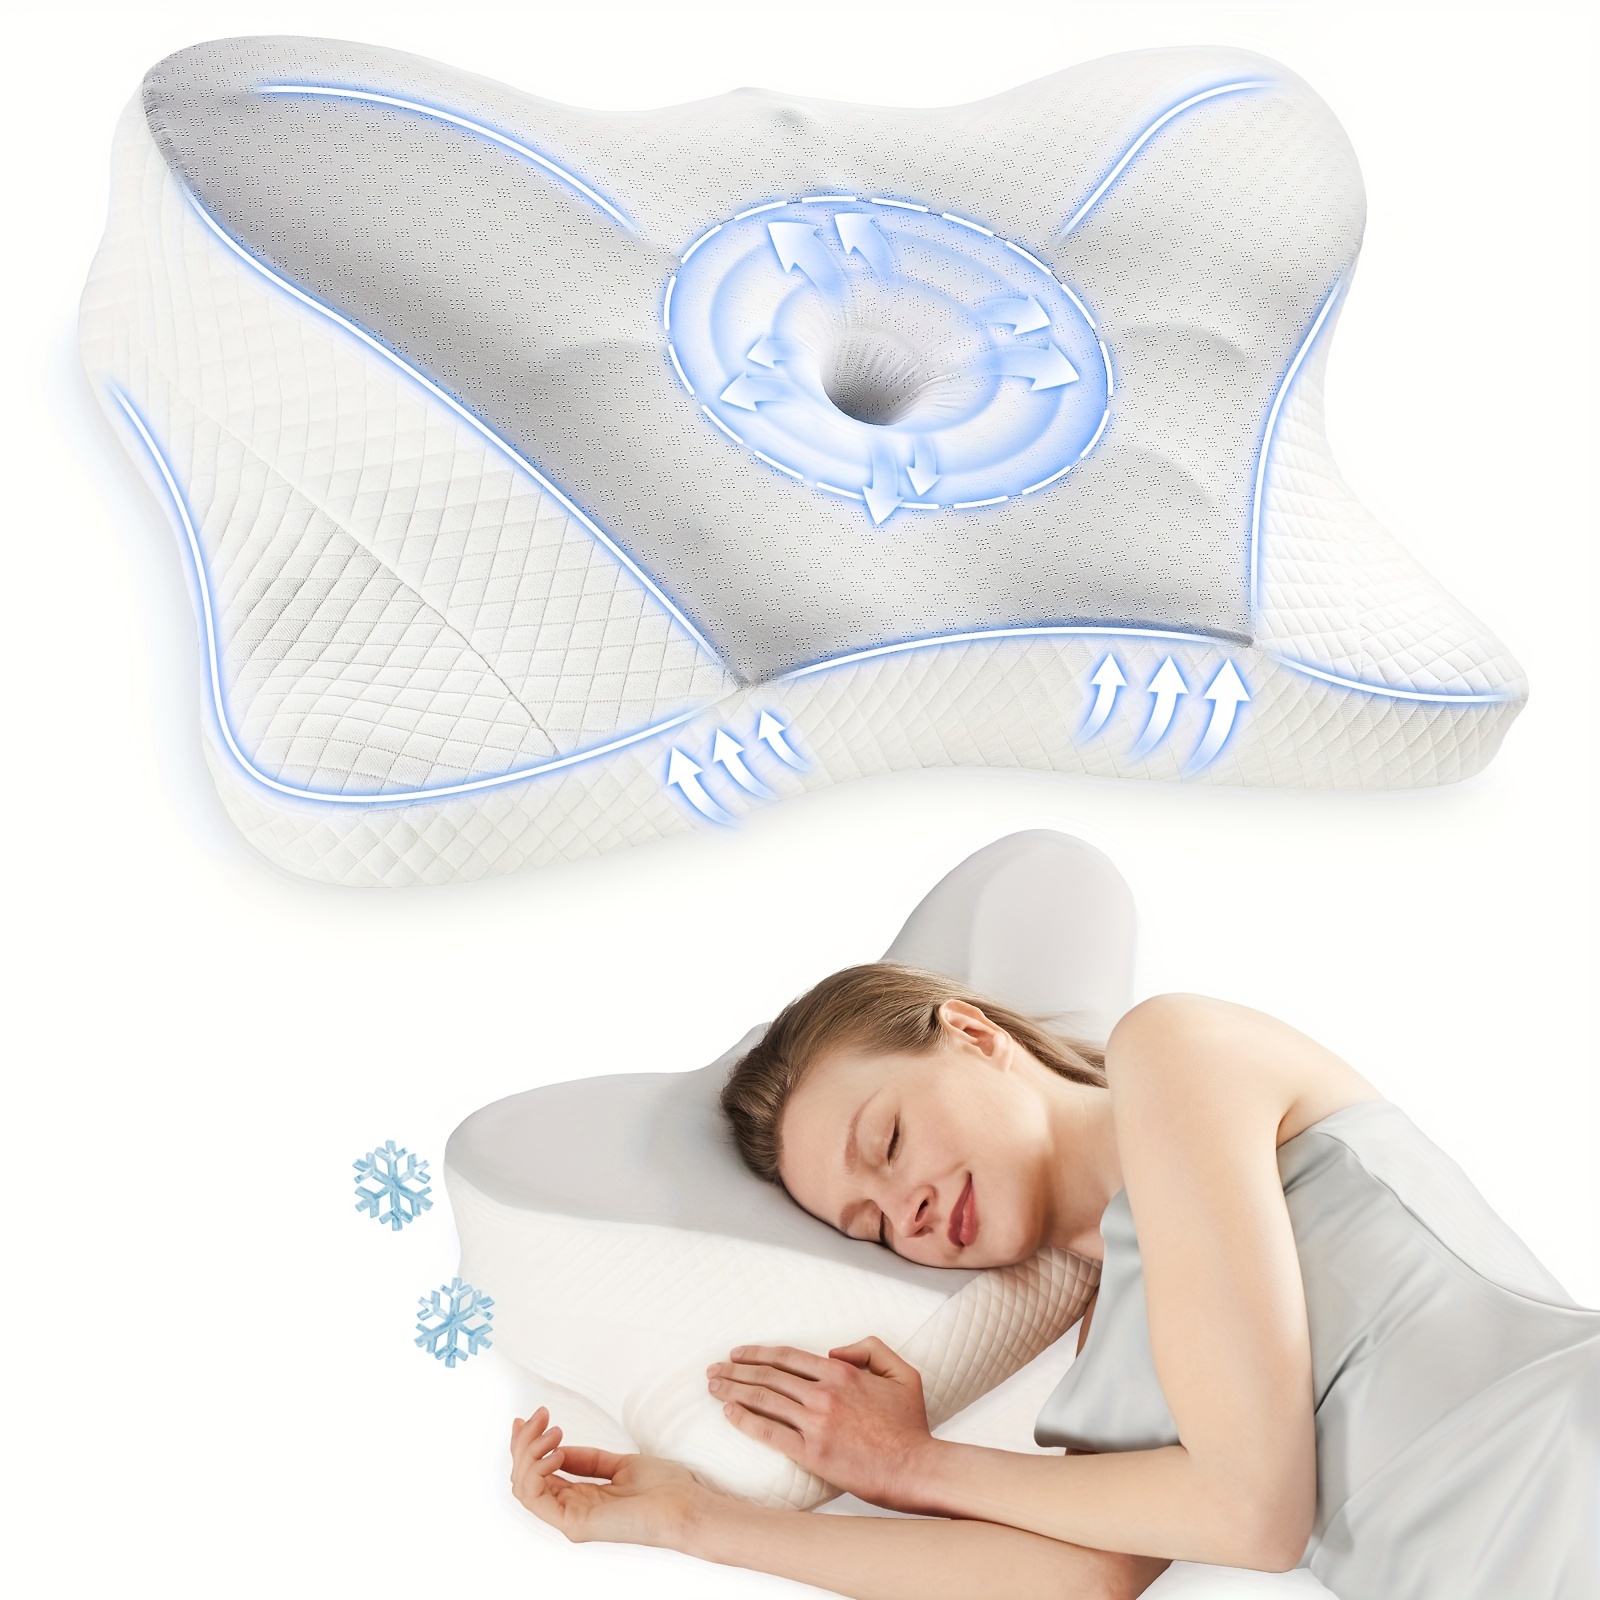 

Ergonomic Contour Neck Pillows- Memory Foam Neck Pillow With Breathable Pillowcase, Cervical Neck Support Pillows For Side, Back And Stomach Sleepers